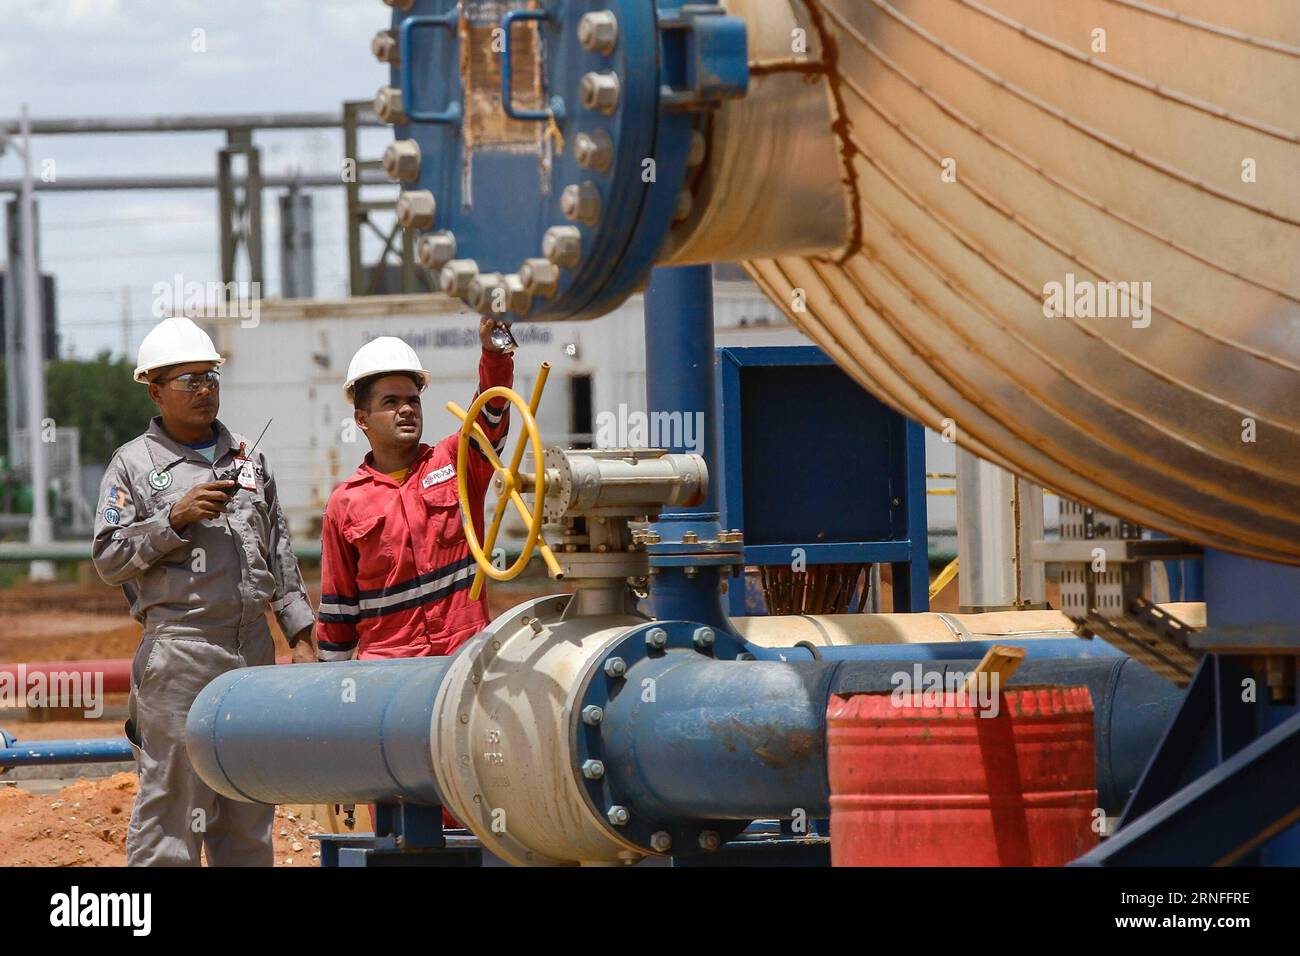 MONAGAS, Aug. 4, 2016 -- Photo taken on Aug. 4, 2016 shows workers of the state-owned Venezuelan oil company Petroleos de Venezuela (PDVSA) working at the facilities of the Chinese-Venezuelan joint company SINOVENSA S.A. in the Orinoco Petroleum Belt in Monagas state, Venezuela. State-run oil companies of Venezuela and China are joining hands to boost oil output from the Orinoco oil belt in southeastern Venezuela, which boasts one of the world s largest oil reserves. )(syq) VENEZUELA-MONAGAS-CHINA-OIL BorisxVergara PUBLICATIONxNOTxINxCHN   Monagas Aug 4 2016 Photo Taken ON Aug 4 2016 Shows Wor Stock Photo